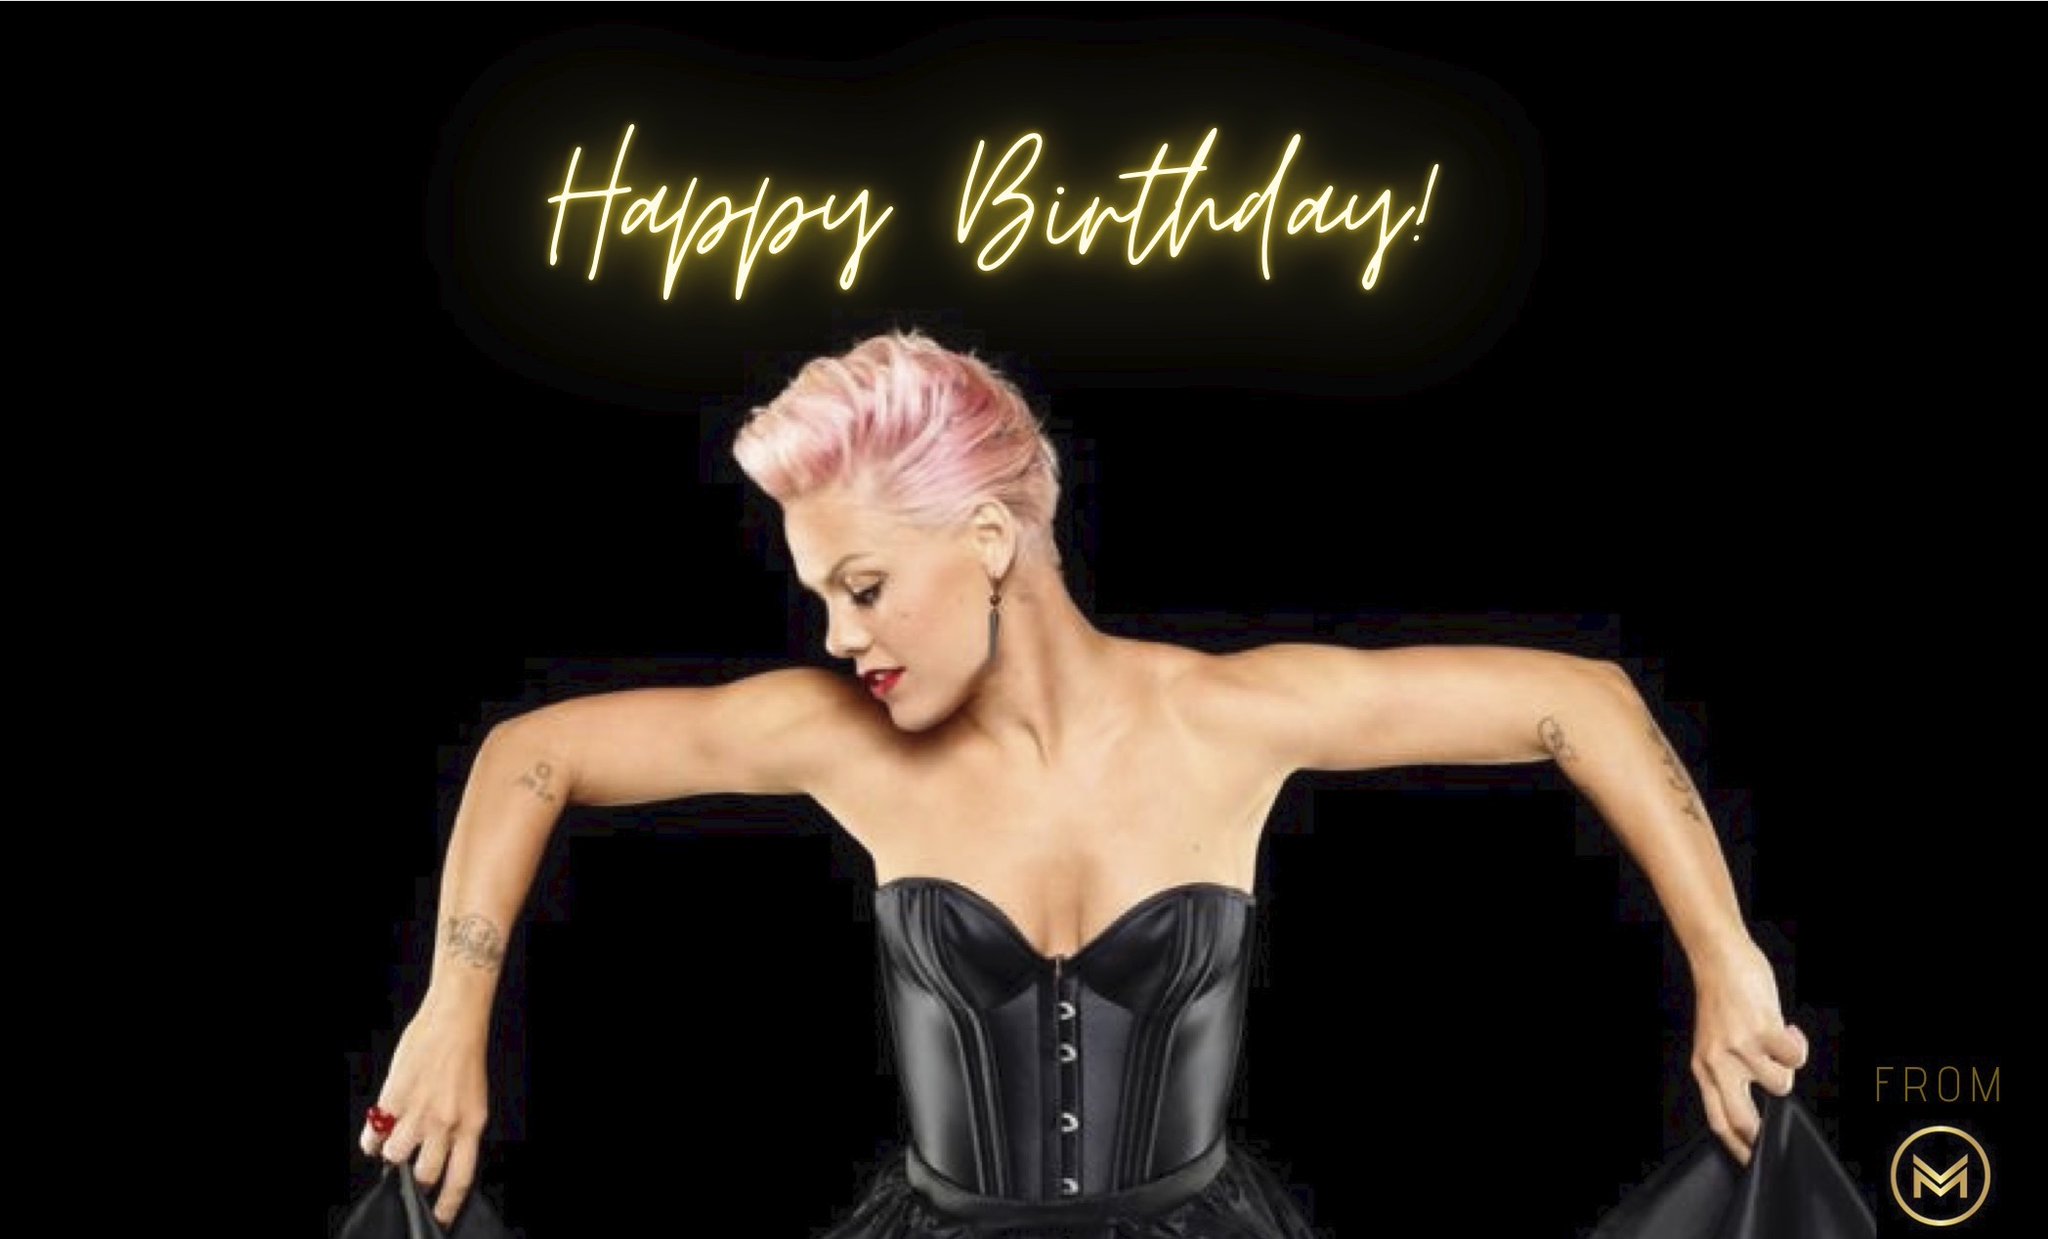  Happy Birthday!  Which song made you a fan of P!nk? 